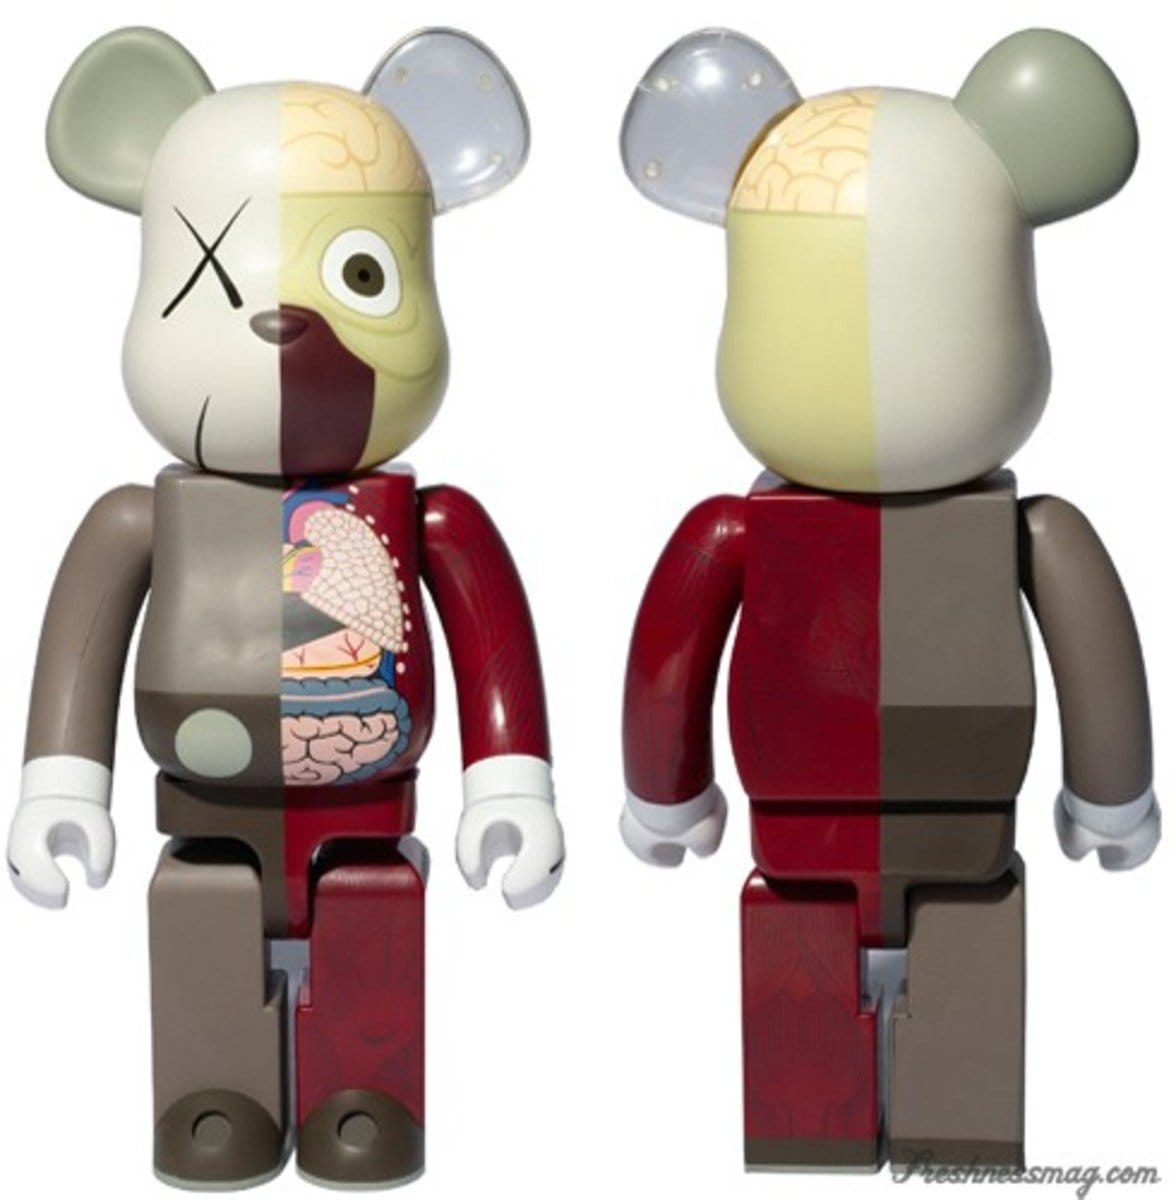 OriginalFake Dissected Bearbrick Companion 400% and 100% (Red), 2008 Enlarged